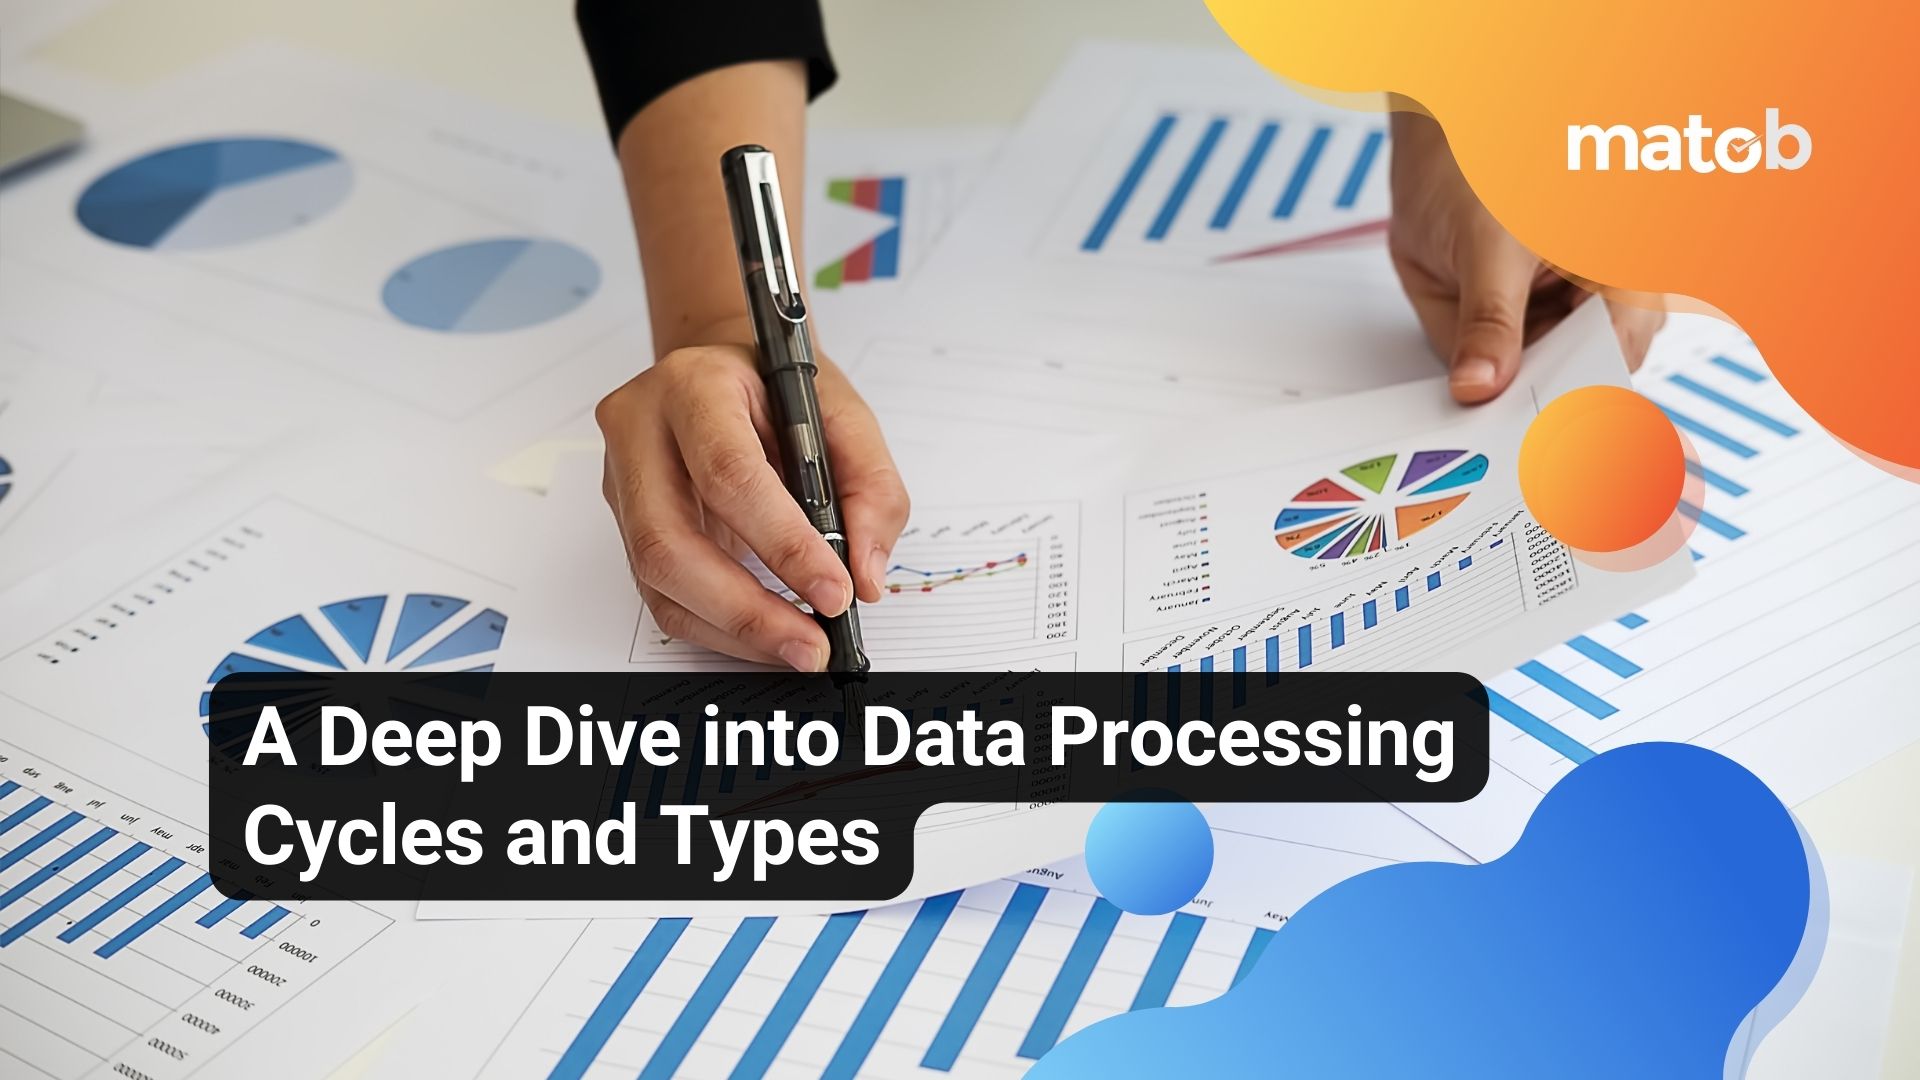 A Deep Dive into Data Processing Cycles and Types